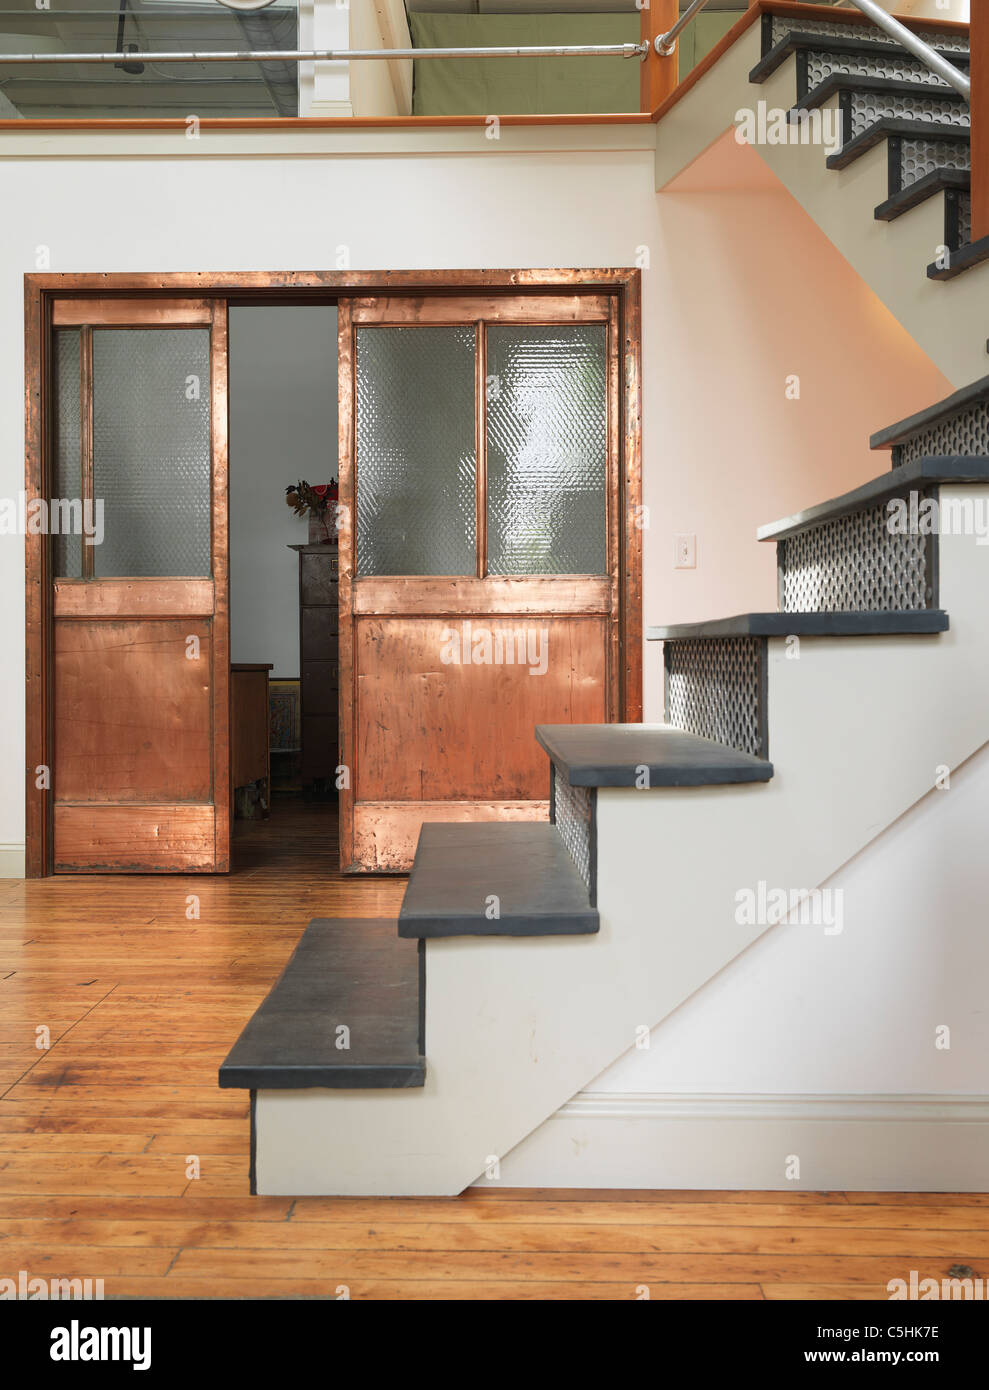 reused doors and steps Stock Photo